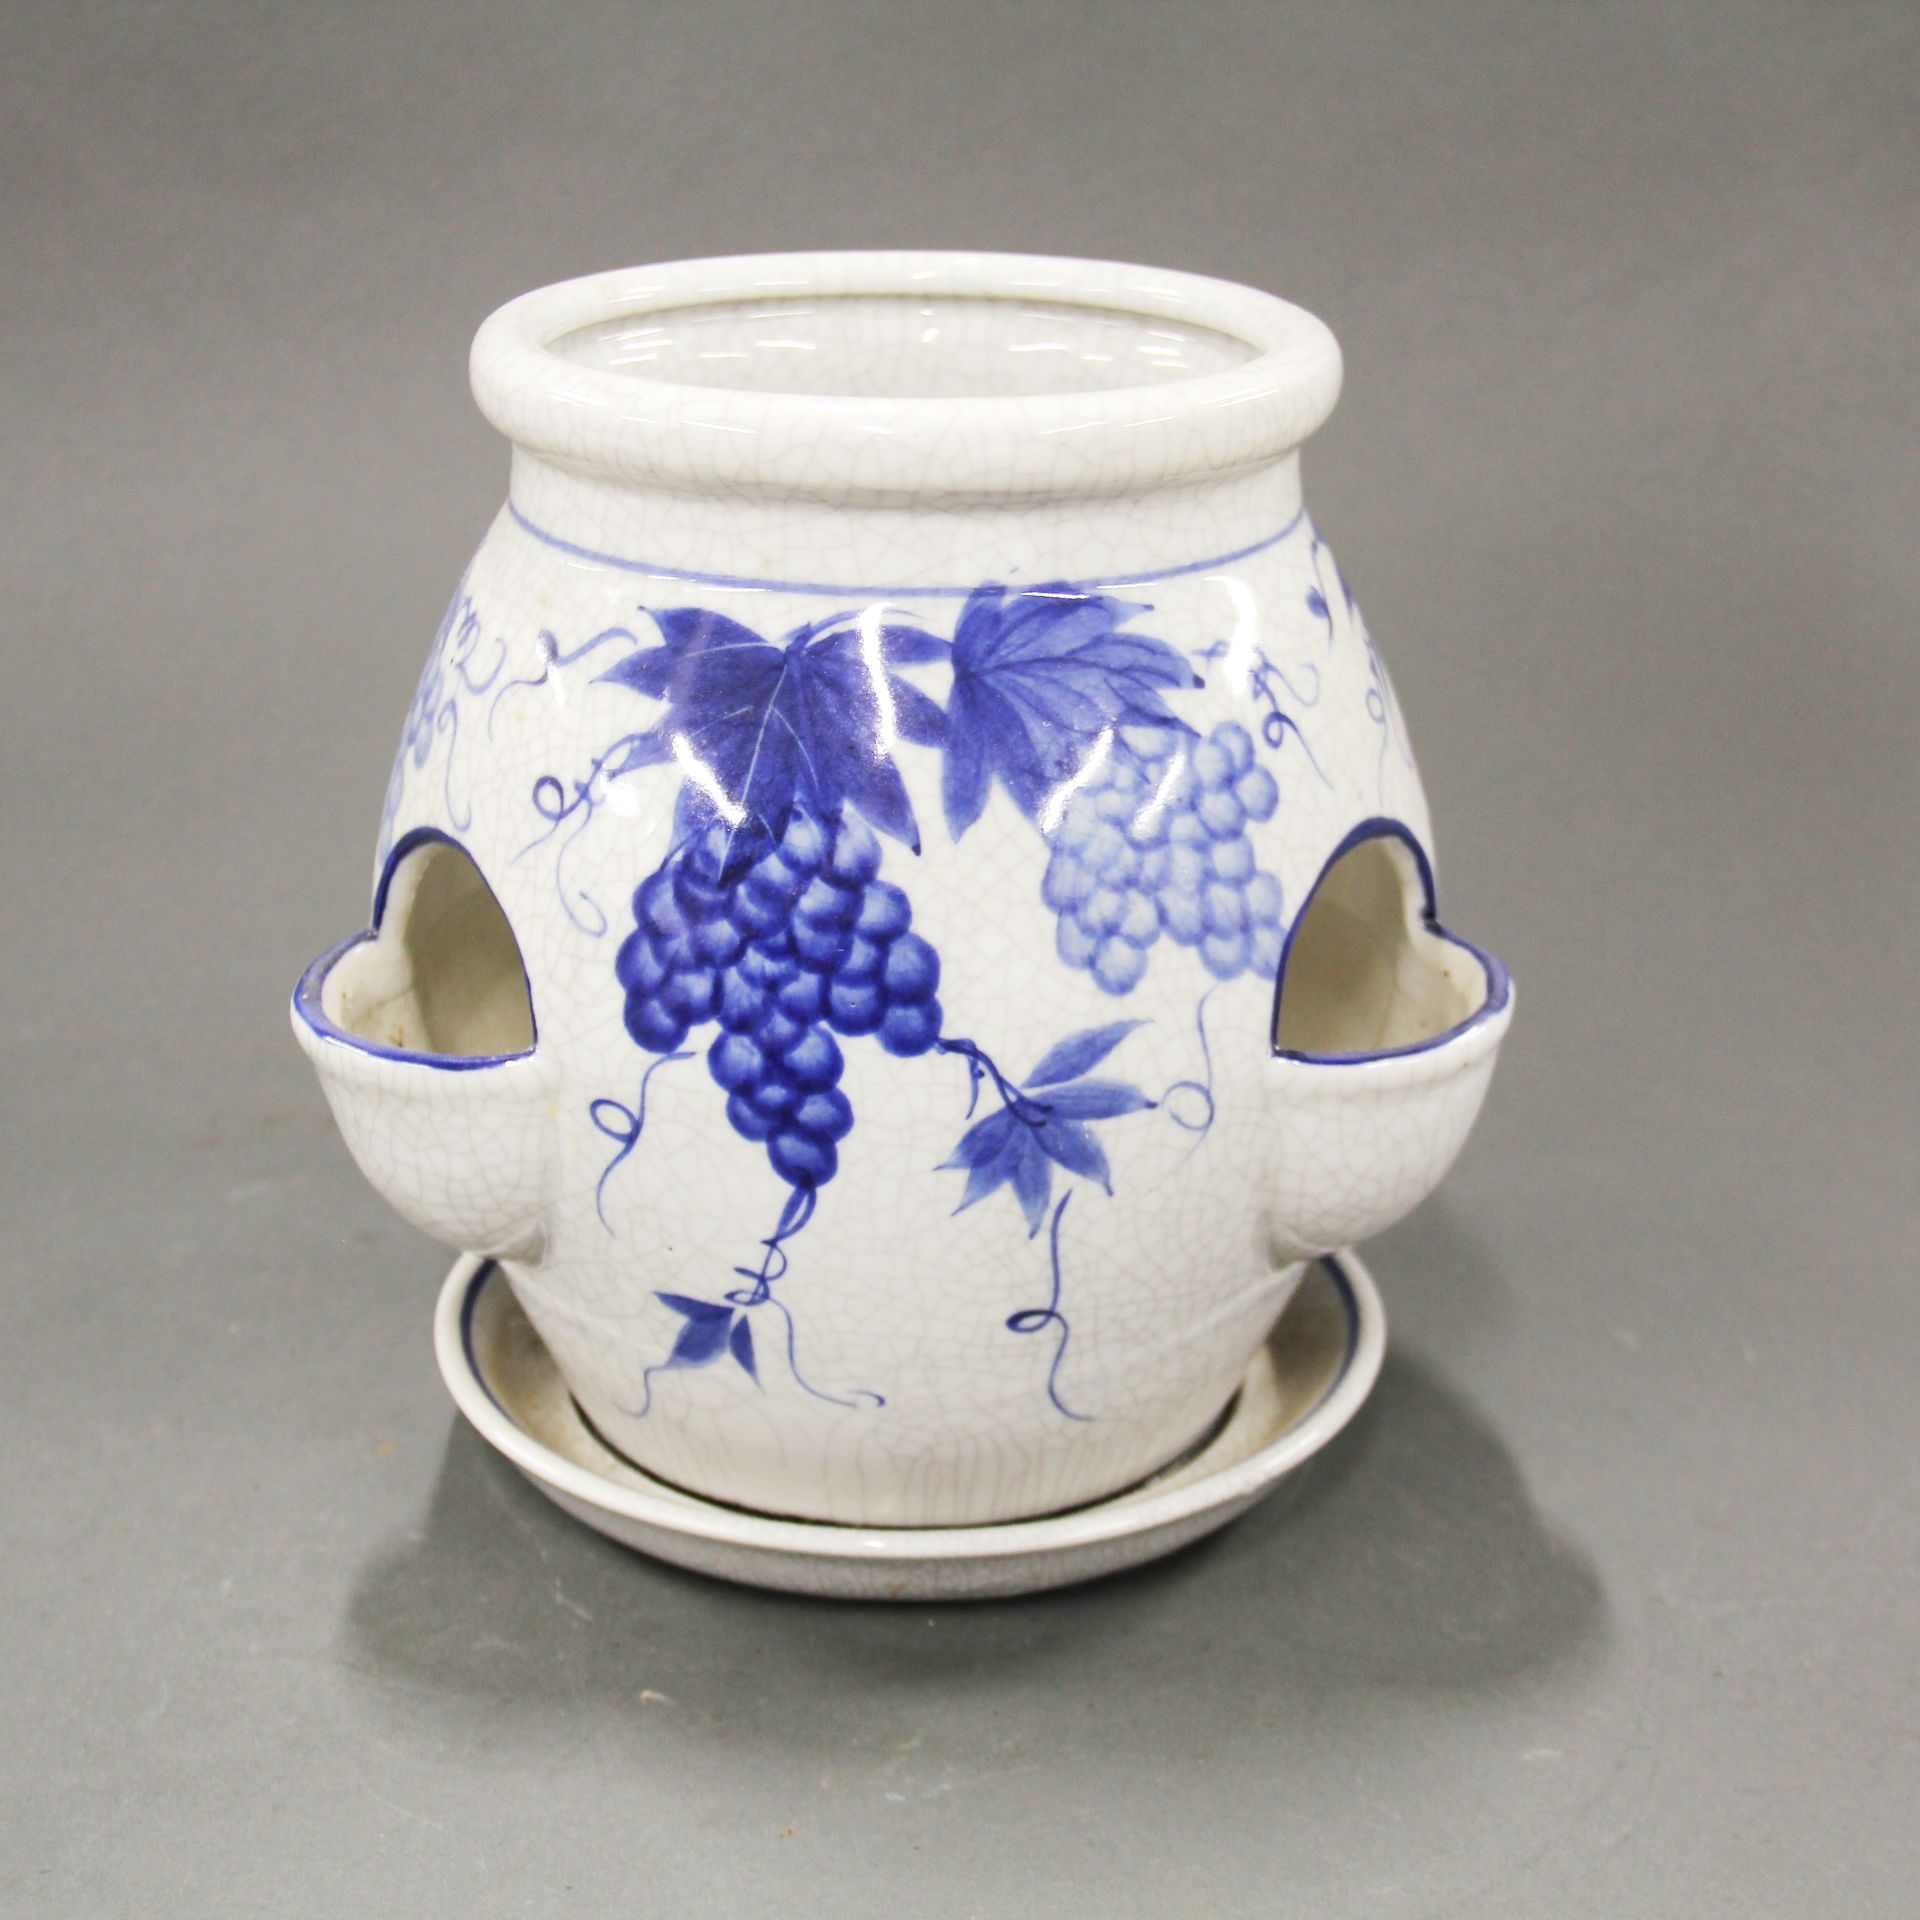 A 19thC relief decorated jug with a Chinese crackle glazed porcelain bowl depicting shipping - Image 6 of 6